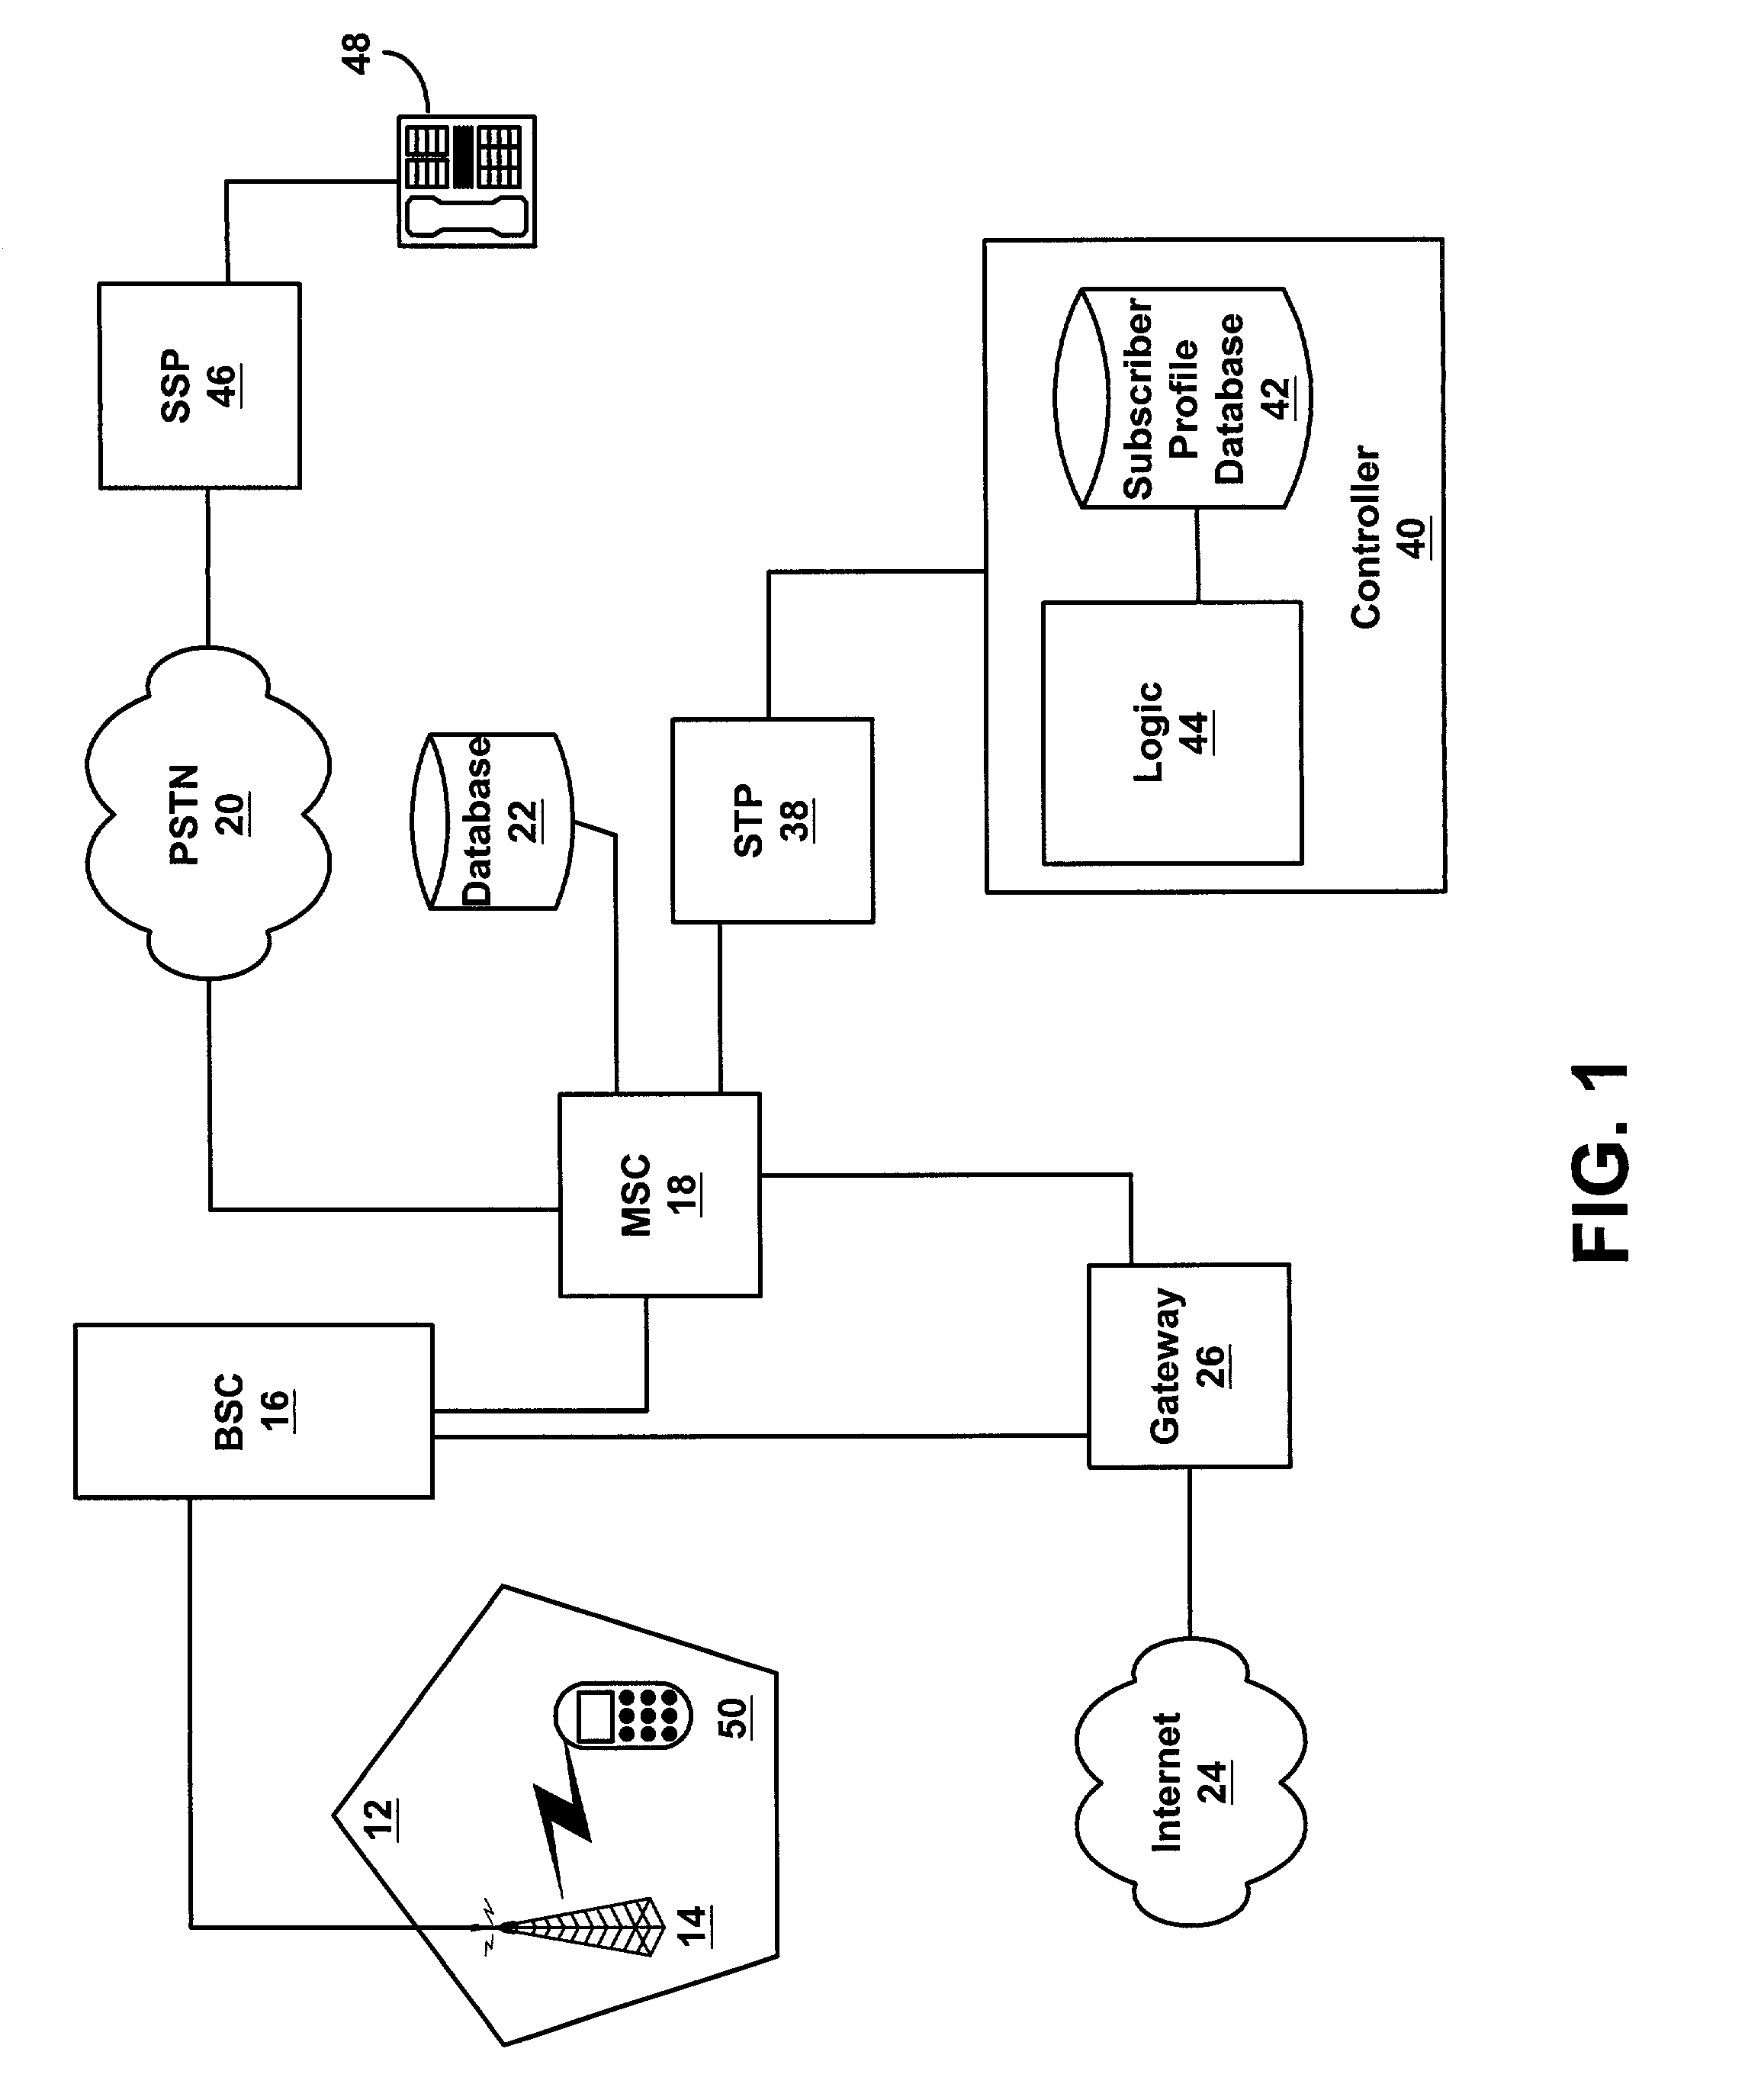 Method for providing differing service levels in a wireless telecommunications network